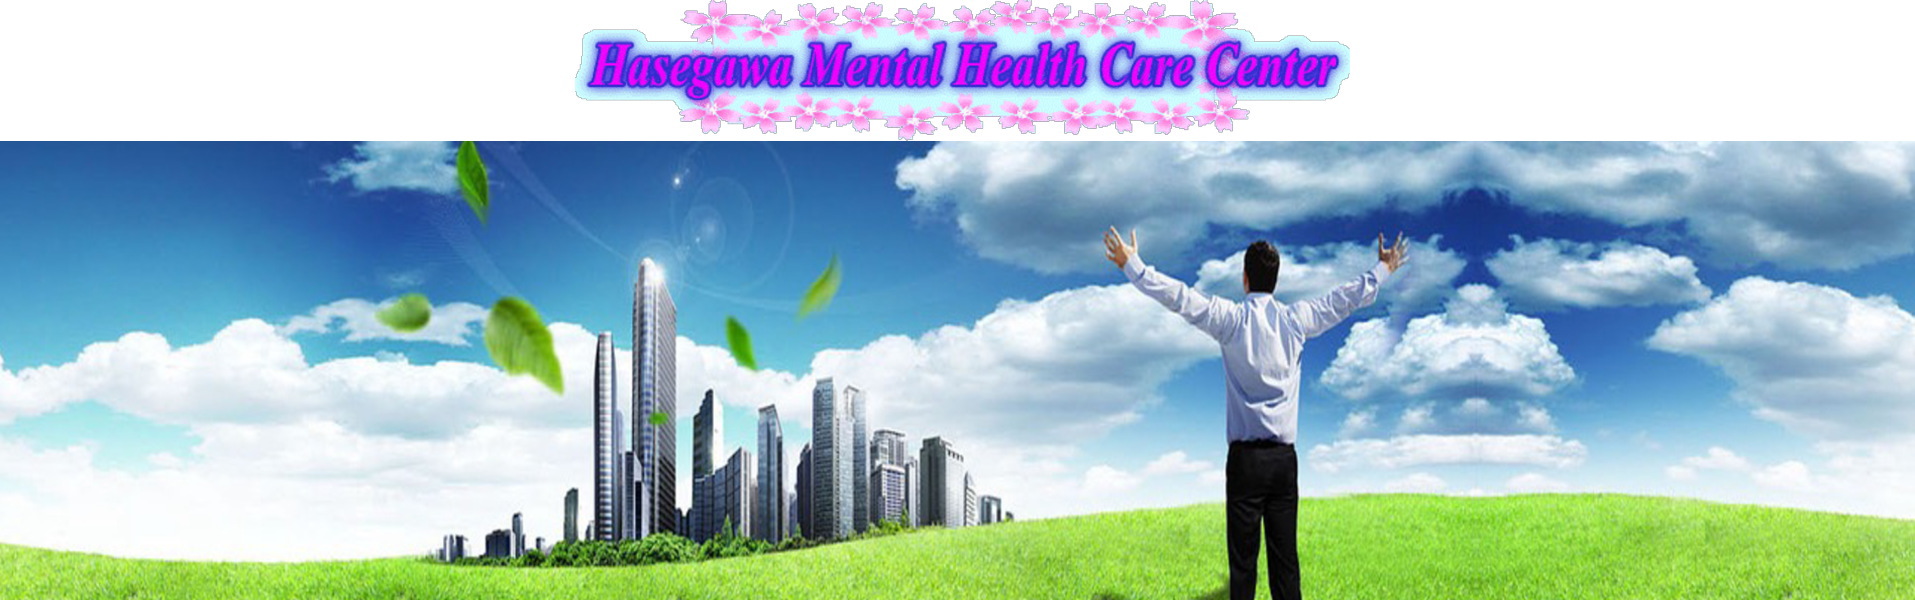 orverview of the hasegawa mental health care center